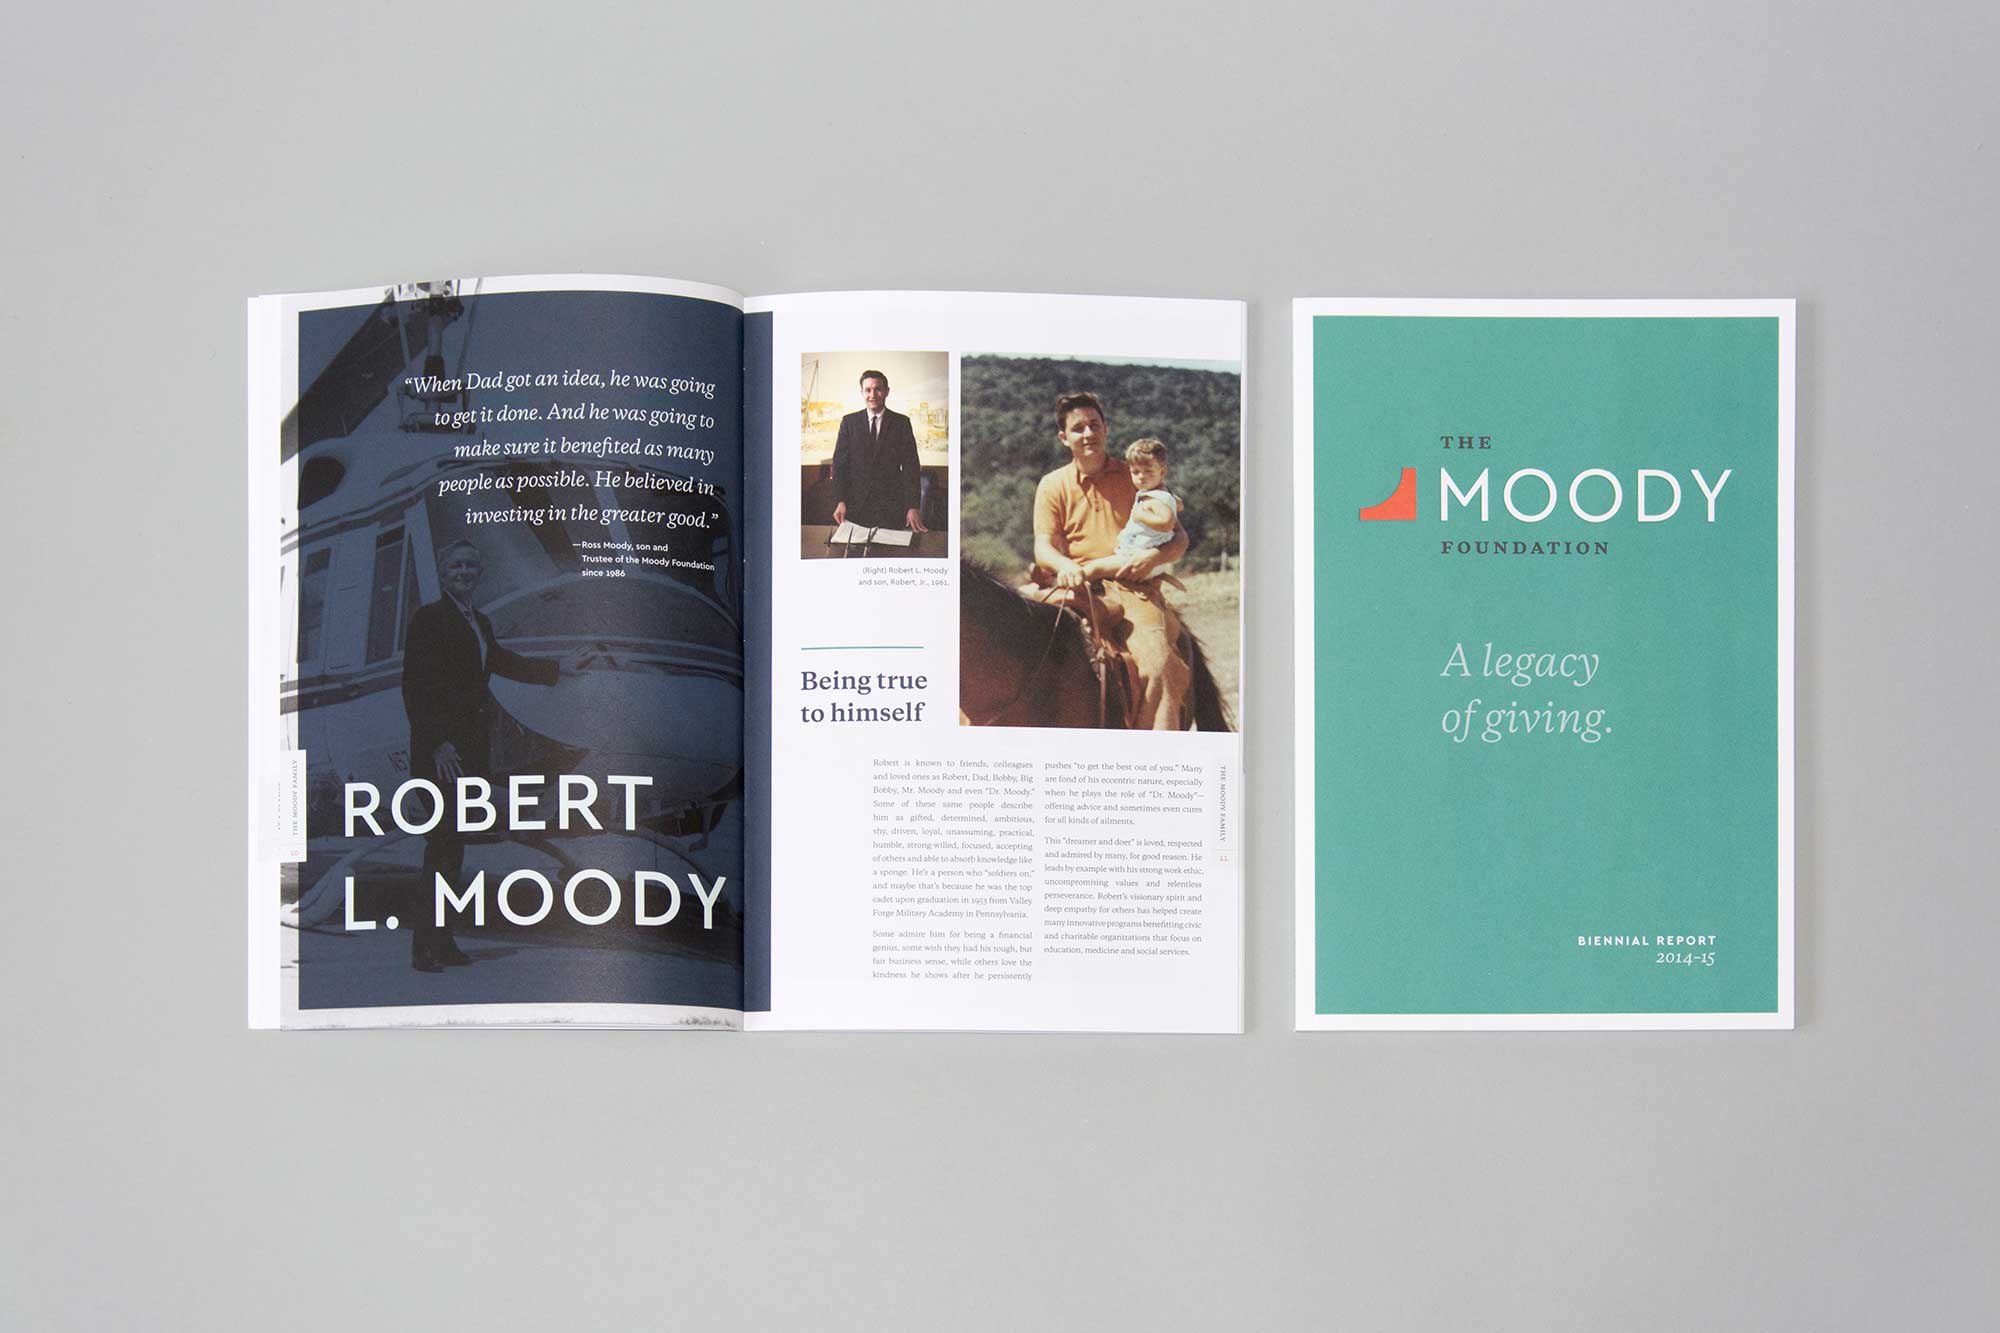 Moody Foundation Annual Report spread and cover